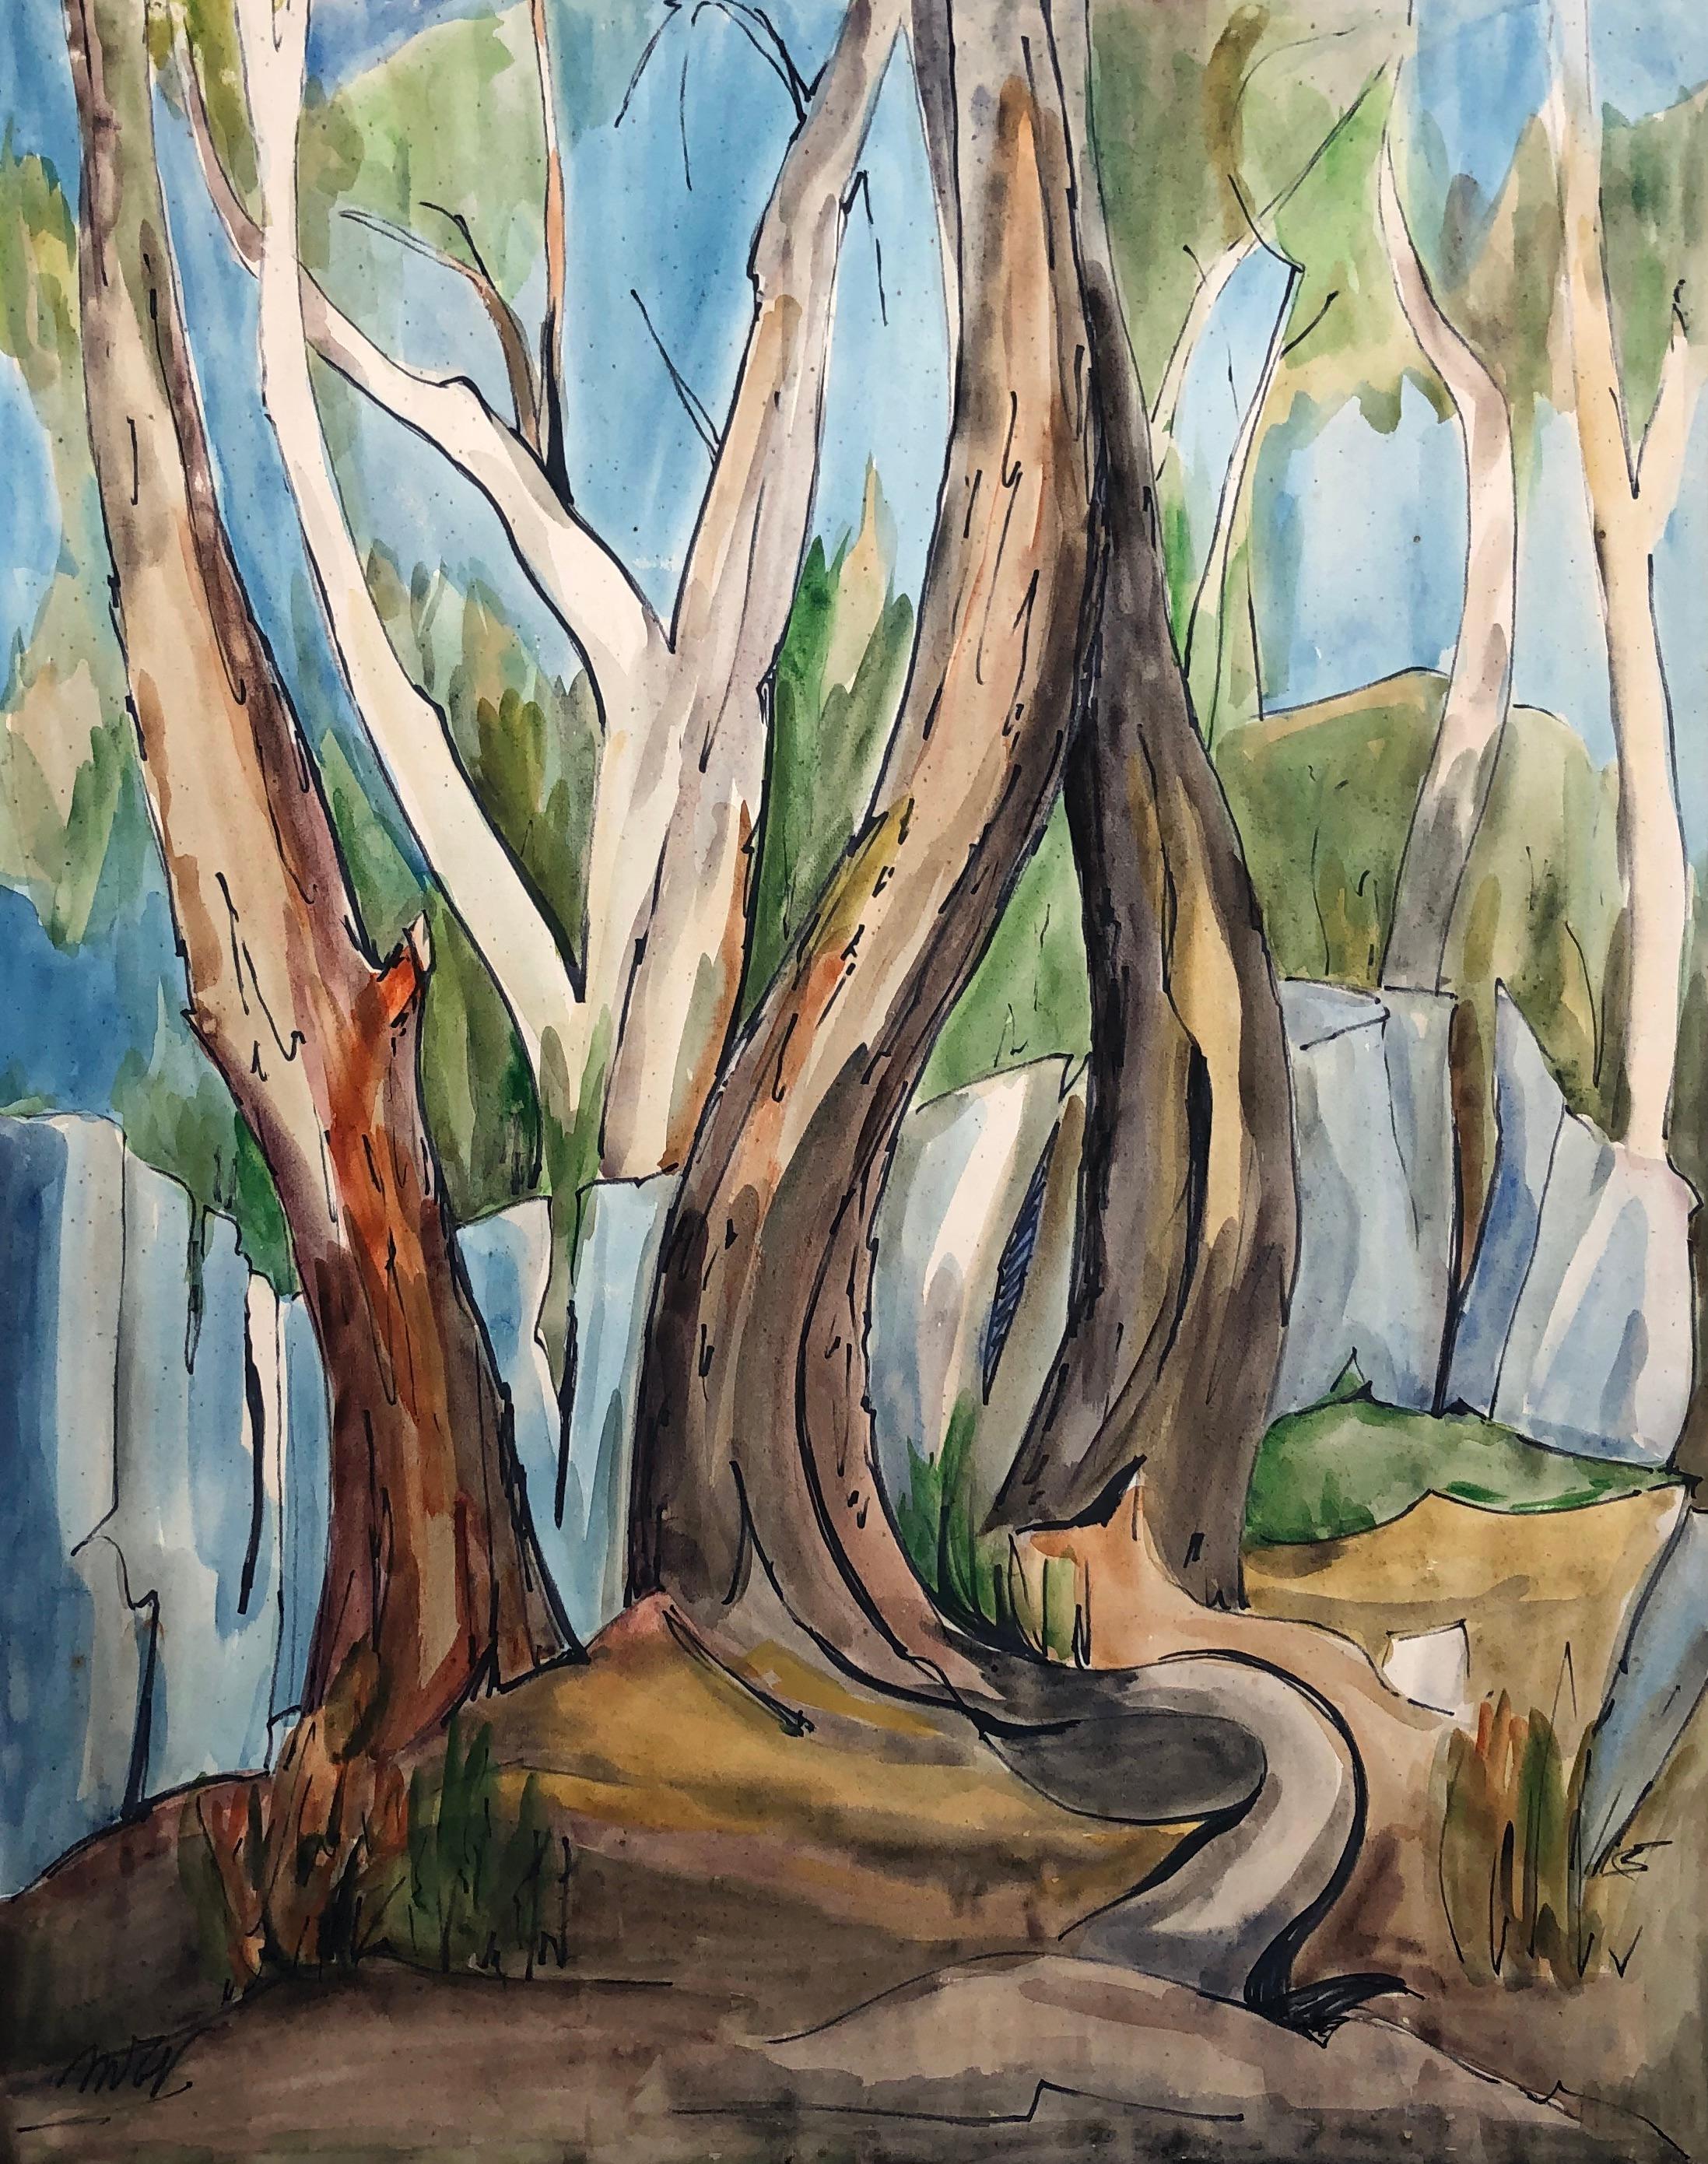 Pines, Watercolor, Signature To Identify